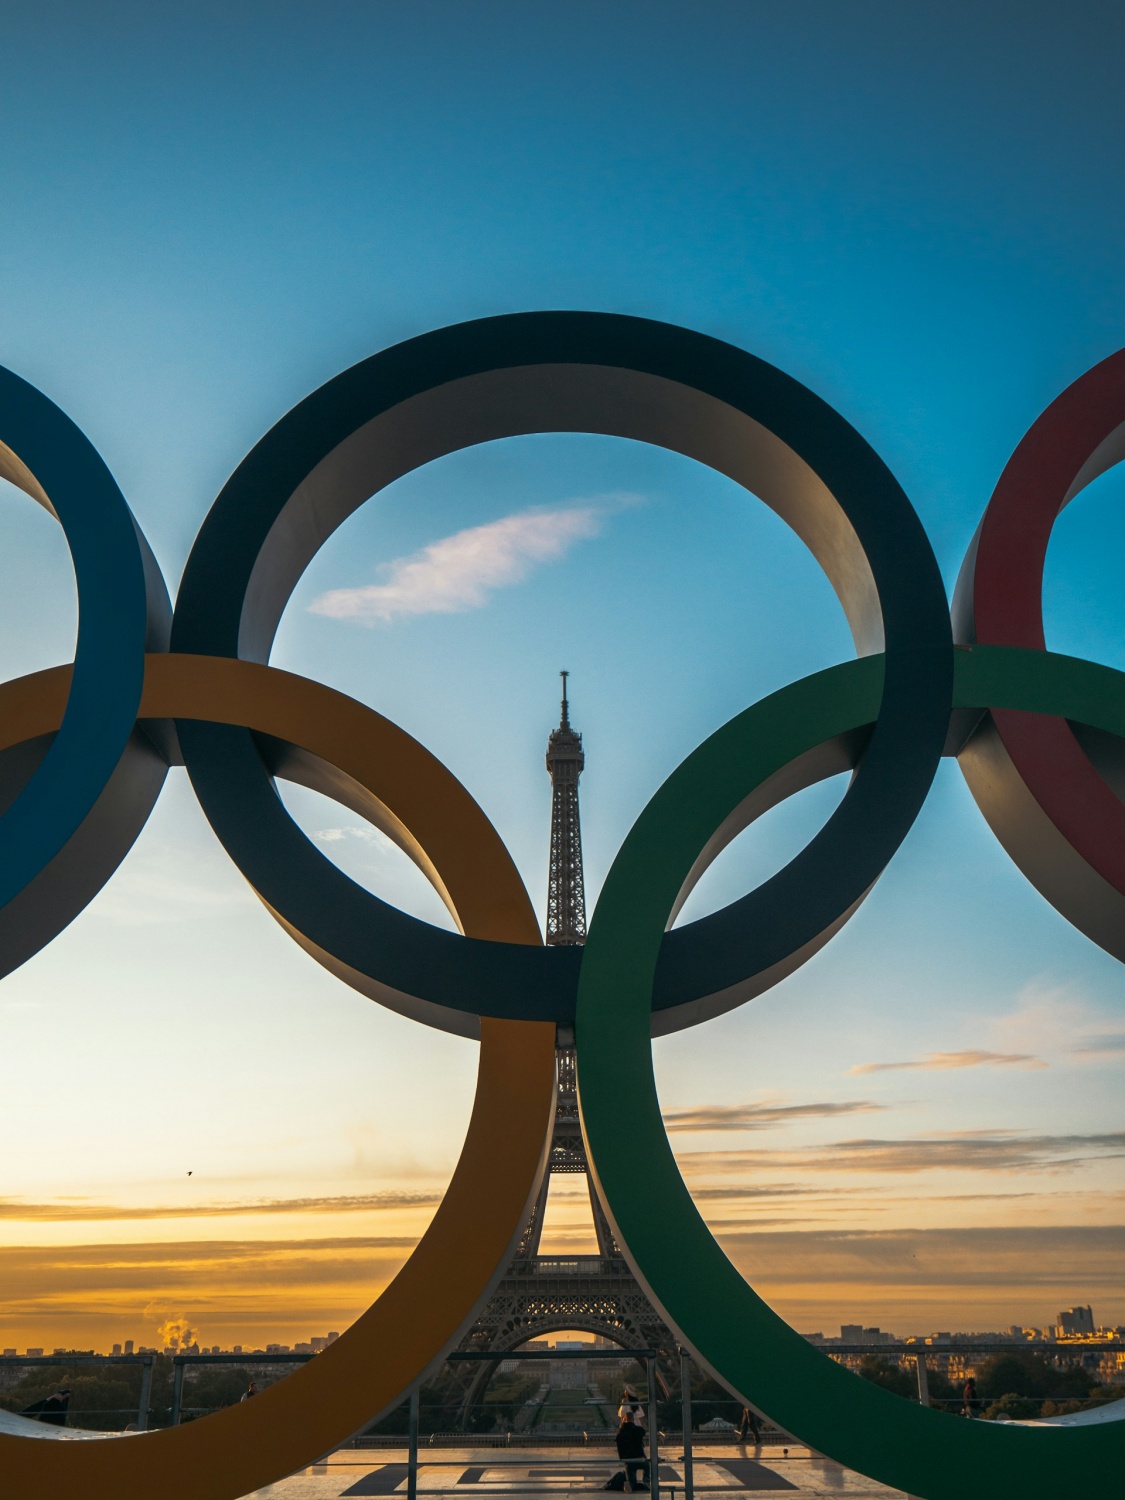 Paris Olympics 2024: International Olympic Committee is Embracing AI For Upcoming Sports Event